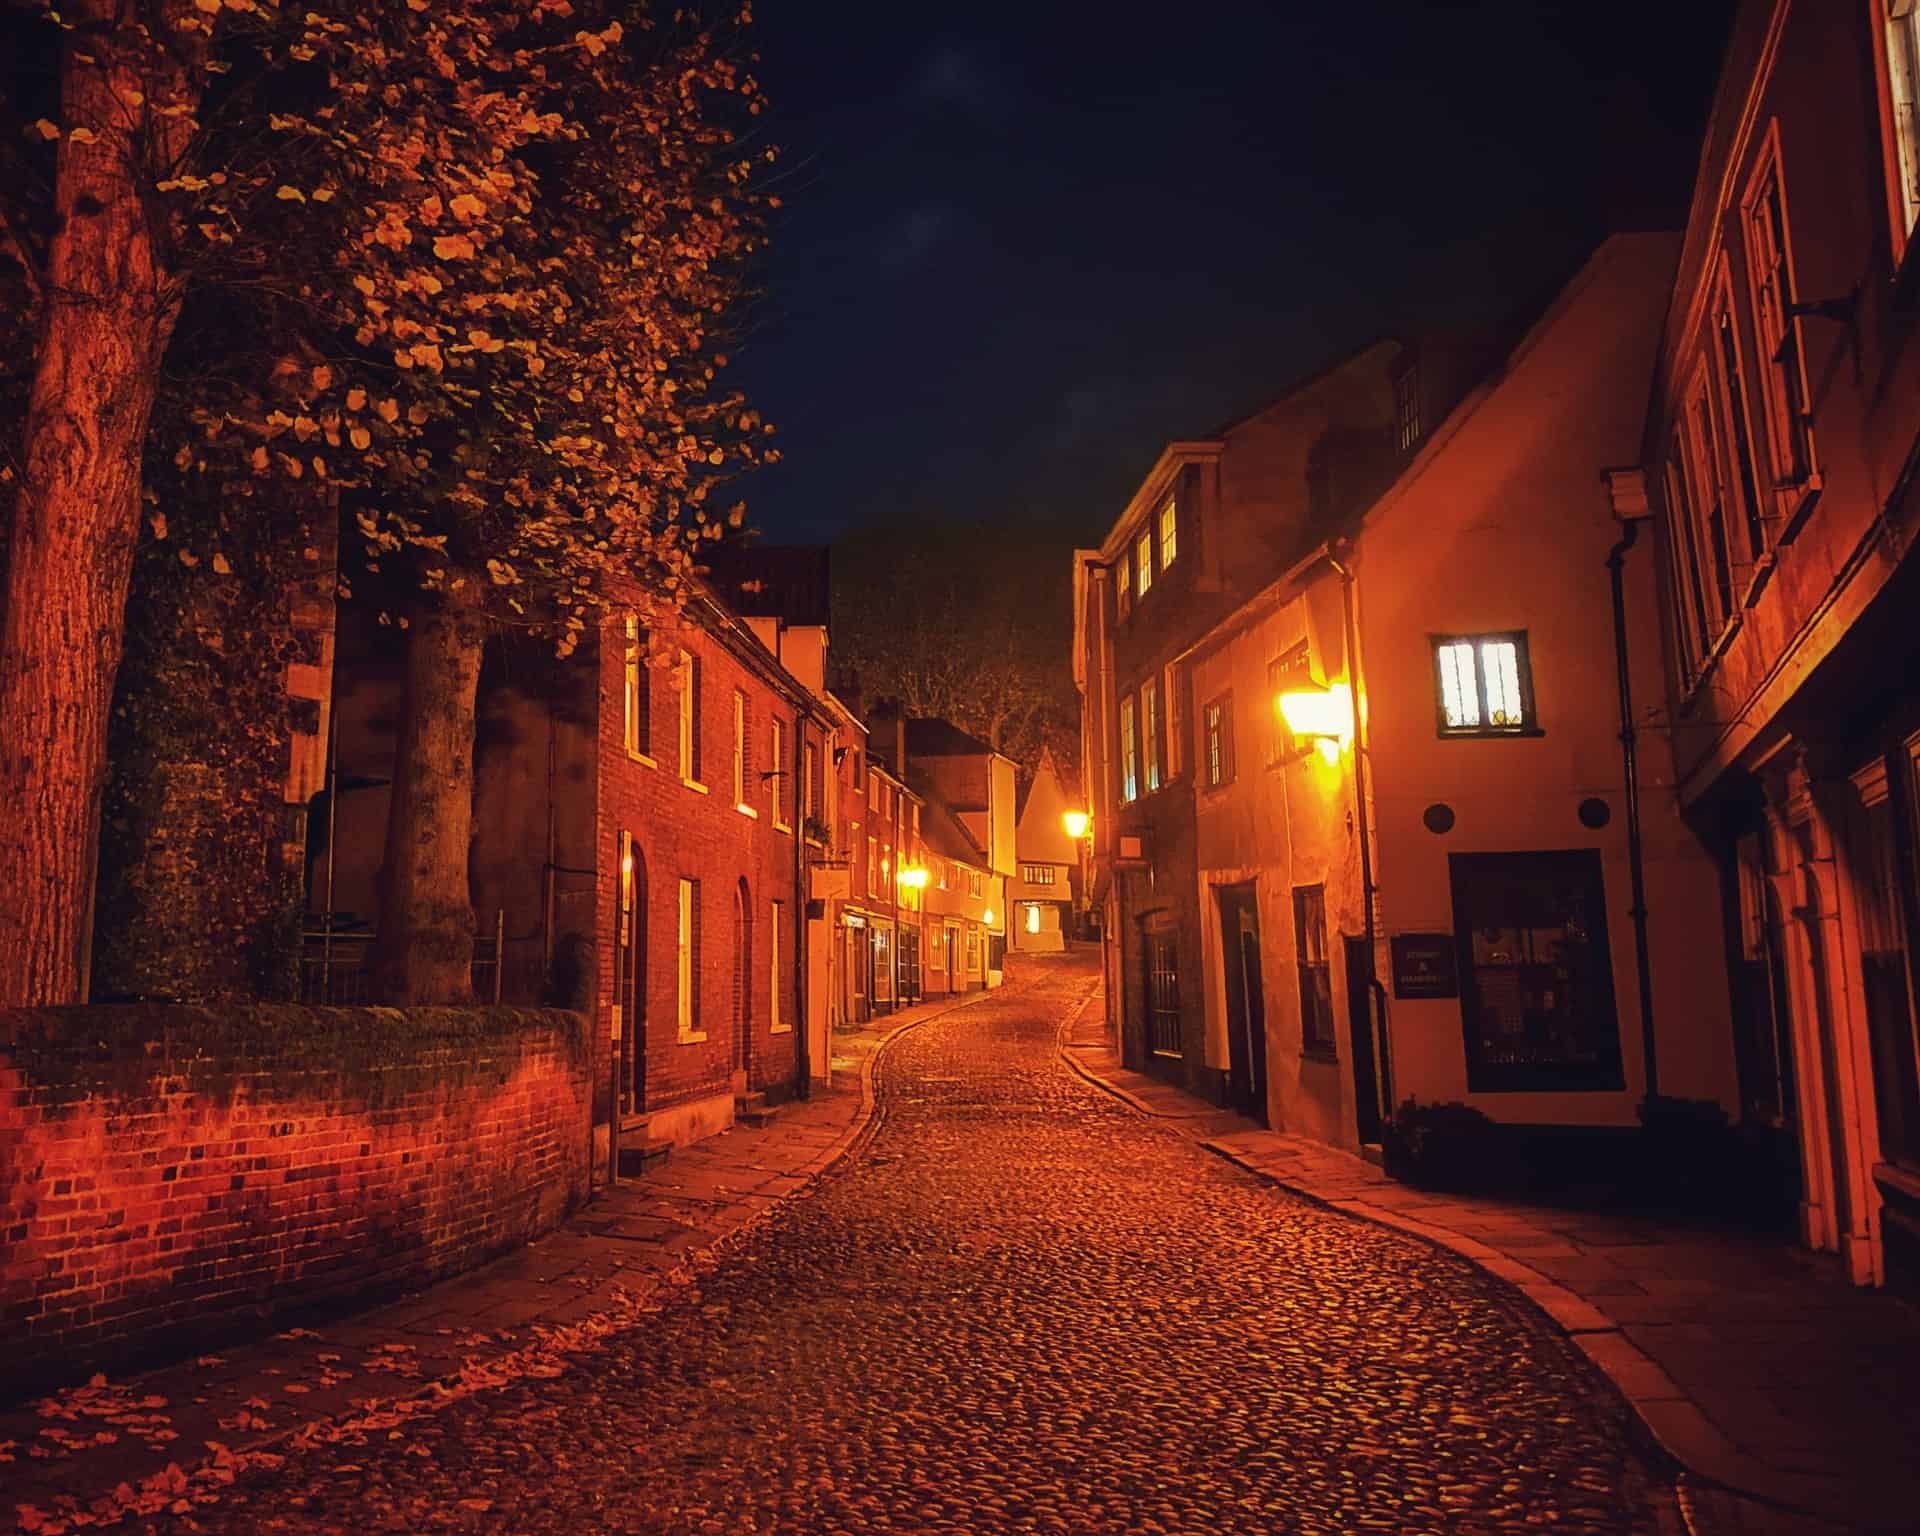 Best things to do in Norwich UK - James Hammond - Elm Hill by Chris Spalton on Unsplash